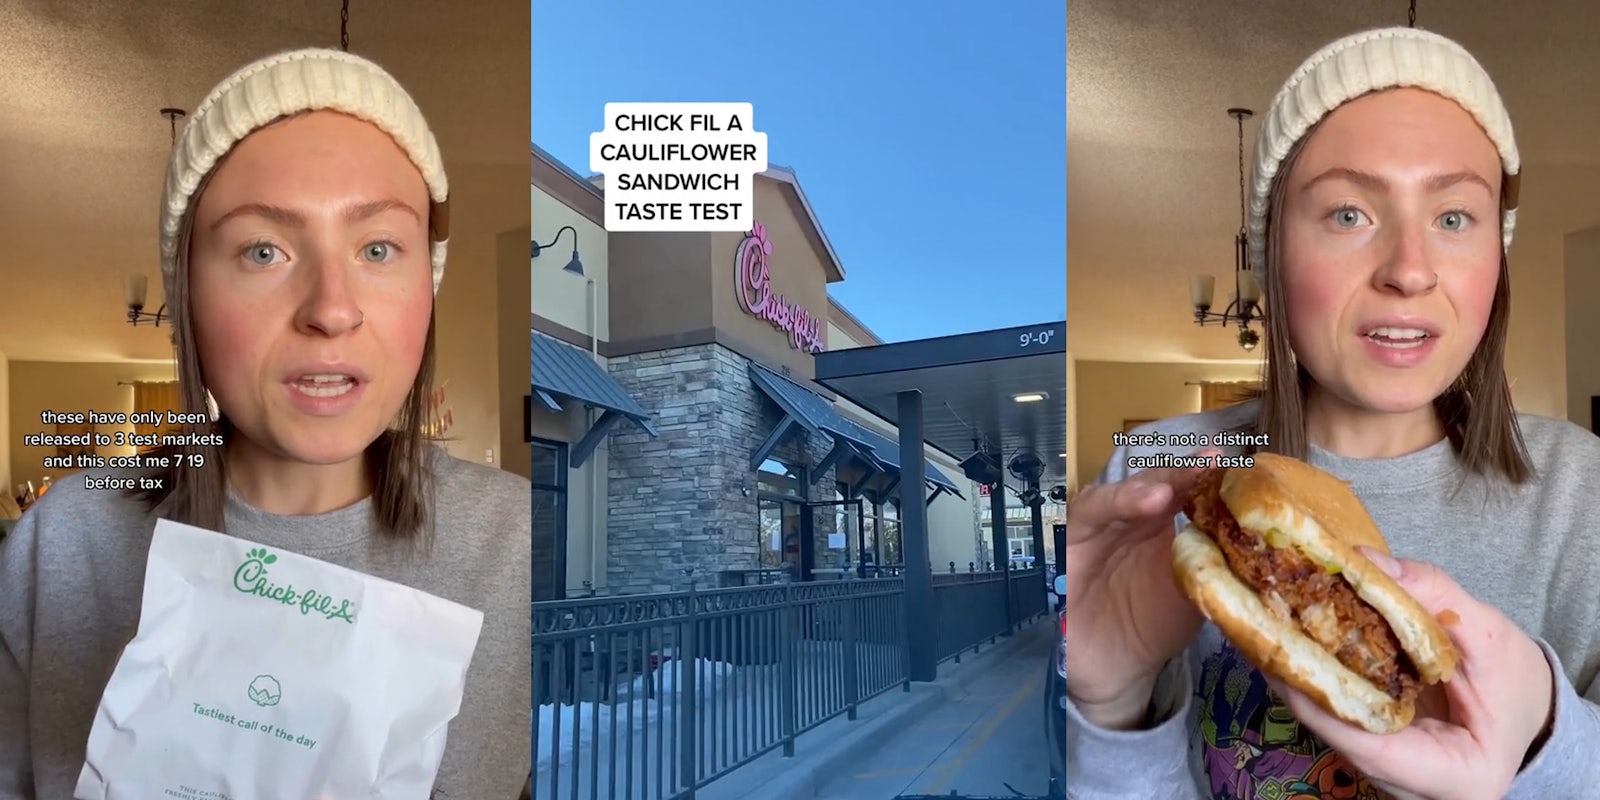 woman holding Chick Fil A sandwich with caption 'these have only been released to 3 test markets and this cost me 7.19 before tax' Chick Fil A building with sign and caption 'CHICK FIL A CAULIFLOWER SANDWICH TASTE TEST' (c) woman holding sandwich with caption 'there's not a distinct cauliflower taste' (r)